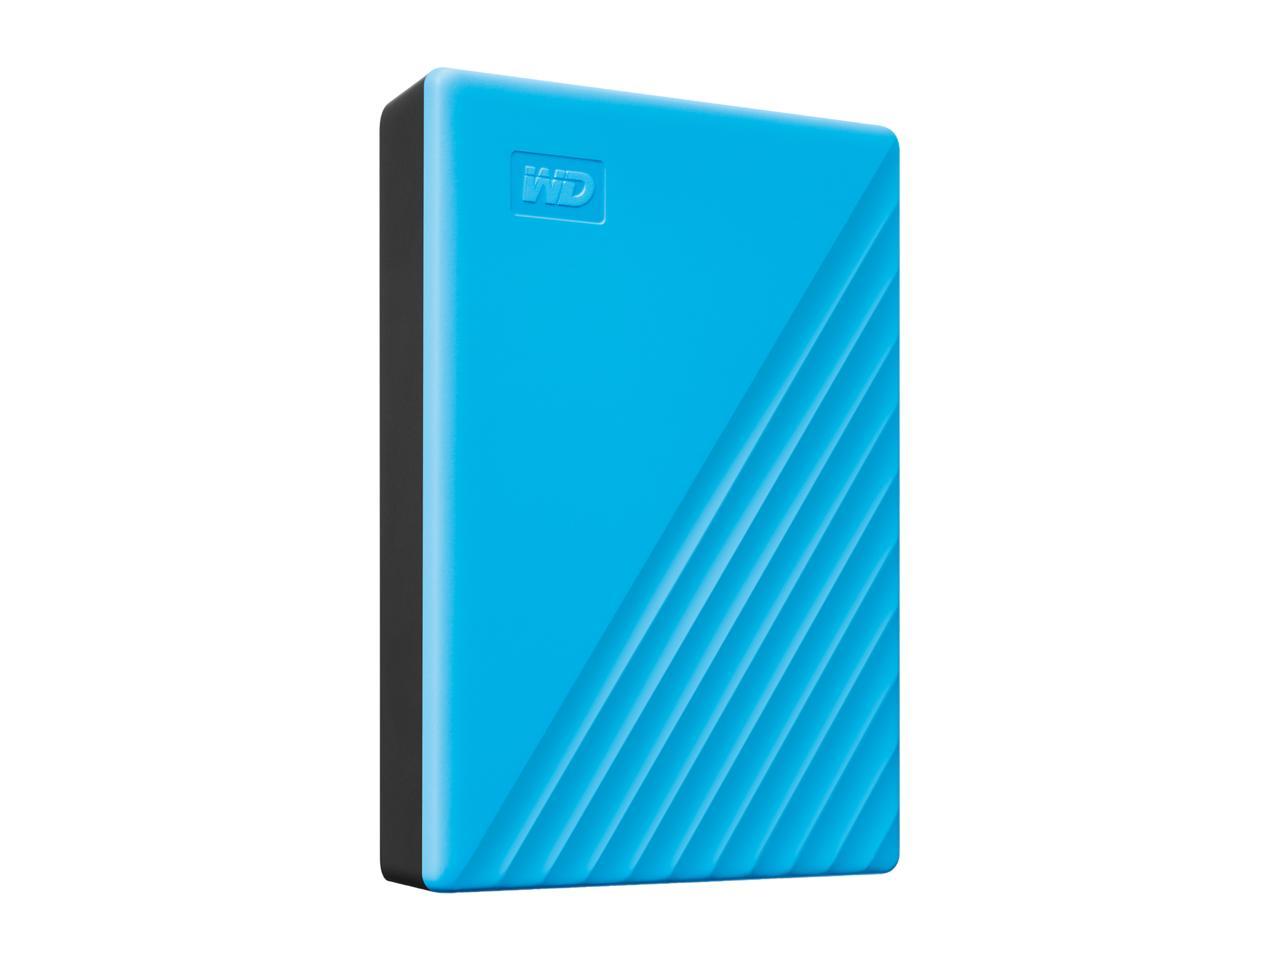 set up wd passport for mac as just a portable hard drive